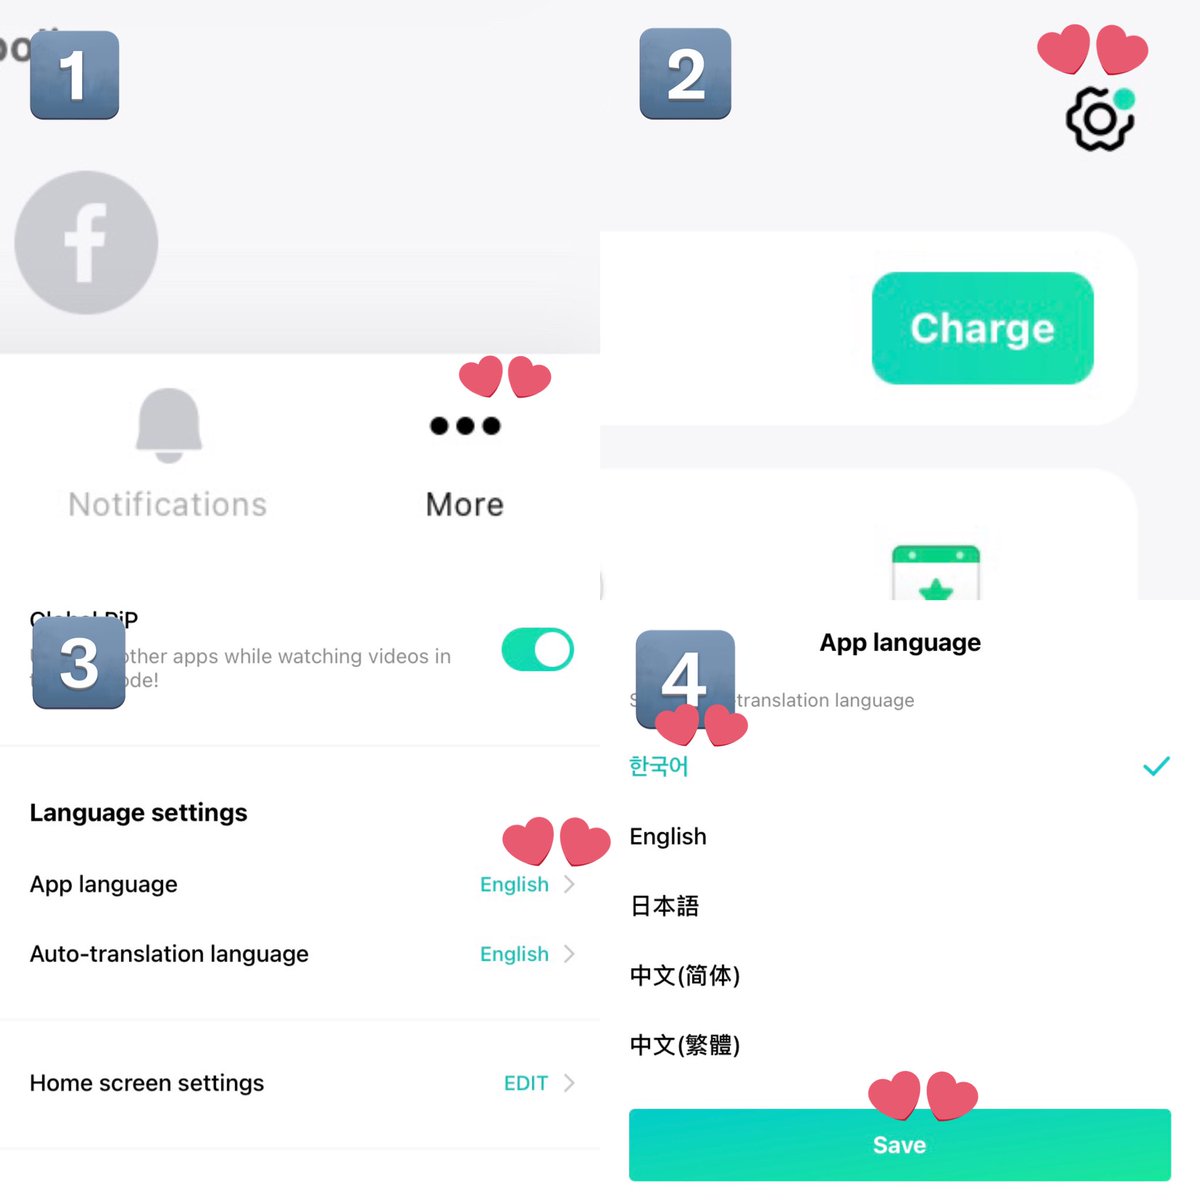 ✅ PRO TIP: Switch your app language to Korean to reach Korean server and more chance to get noticed. Here's how: 1 - click on the three dots icon, bottom right corner 2 - click settings 3 - scroll down to Language Settings, choose App Language 4 - choose 한국어 (kr) and save